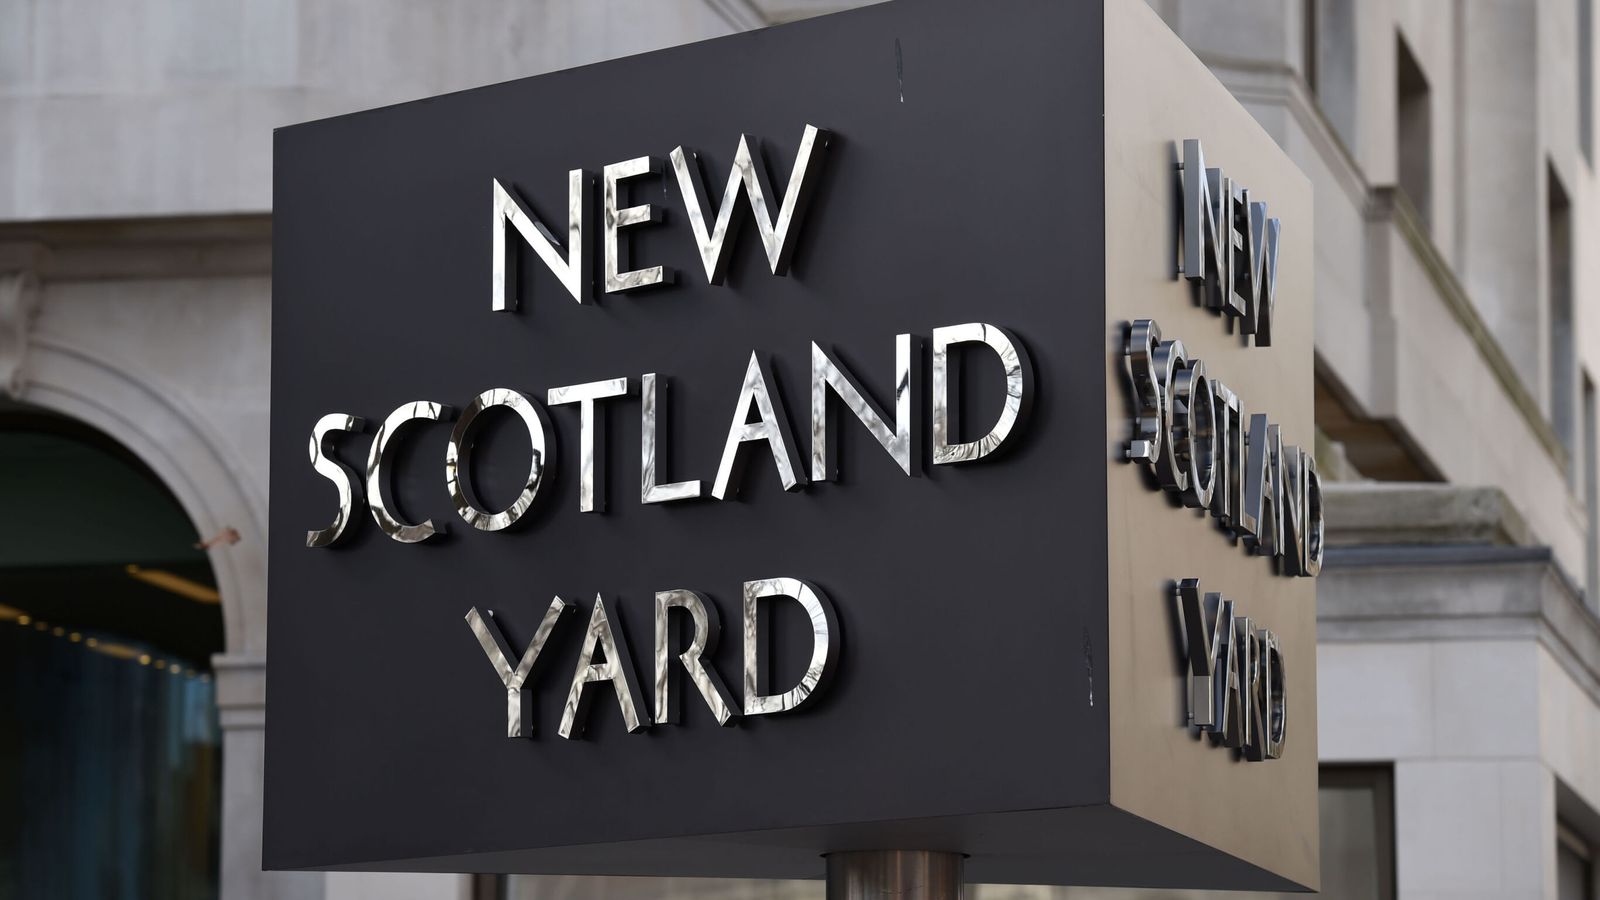 Metropolitan Police officer charged with two counts of rape